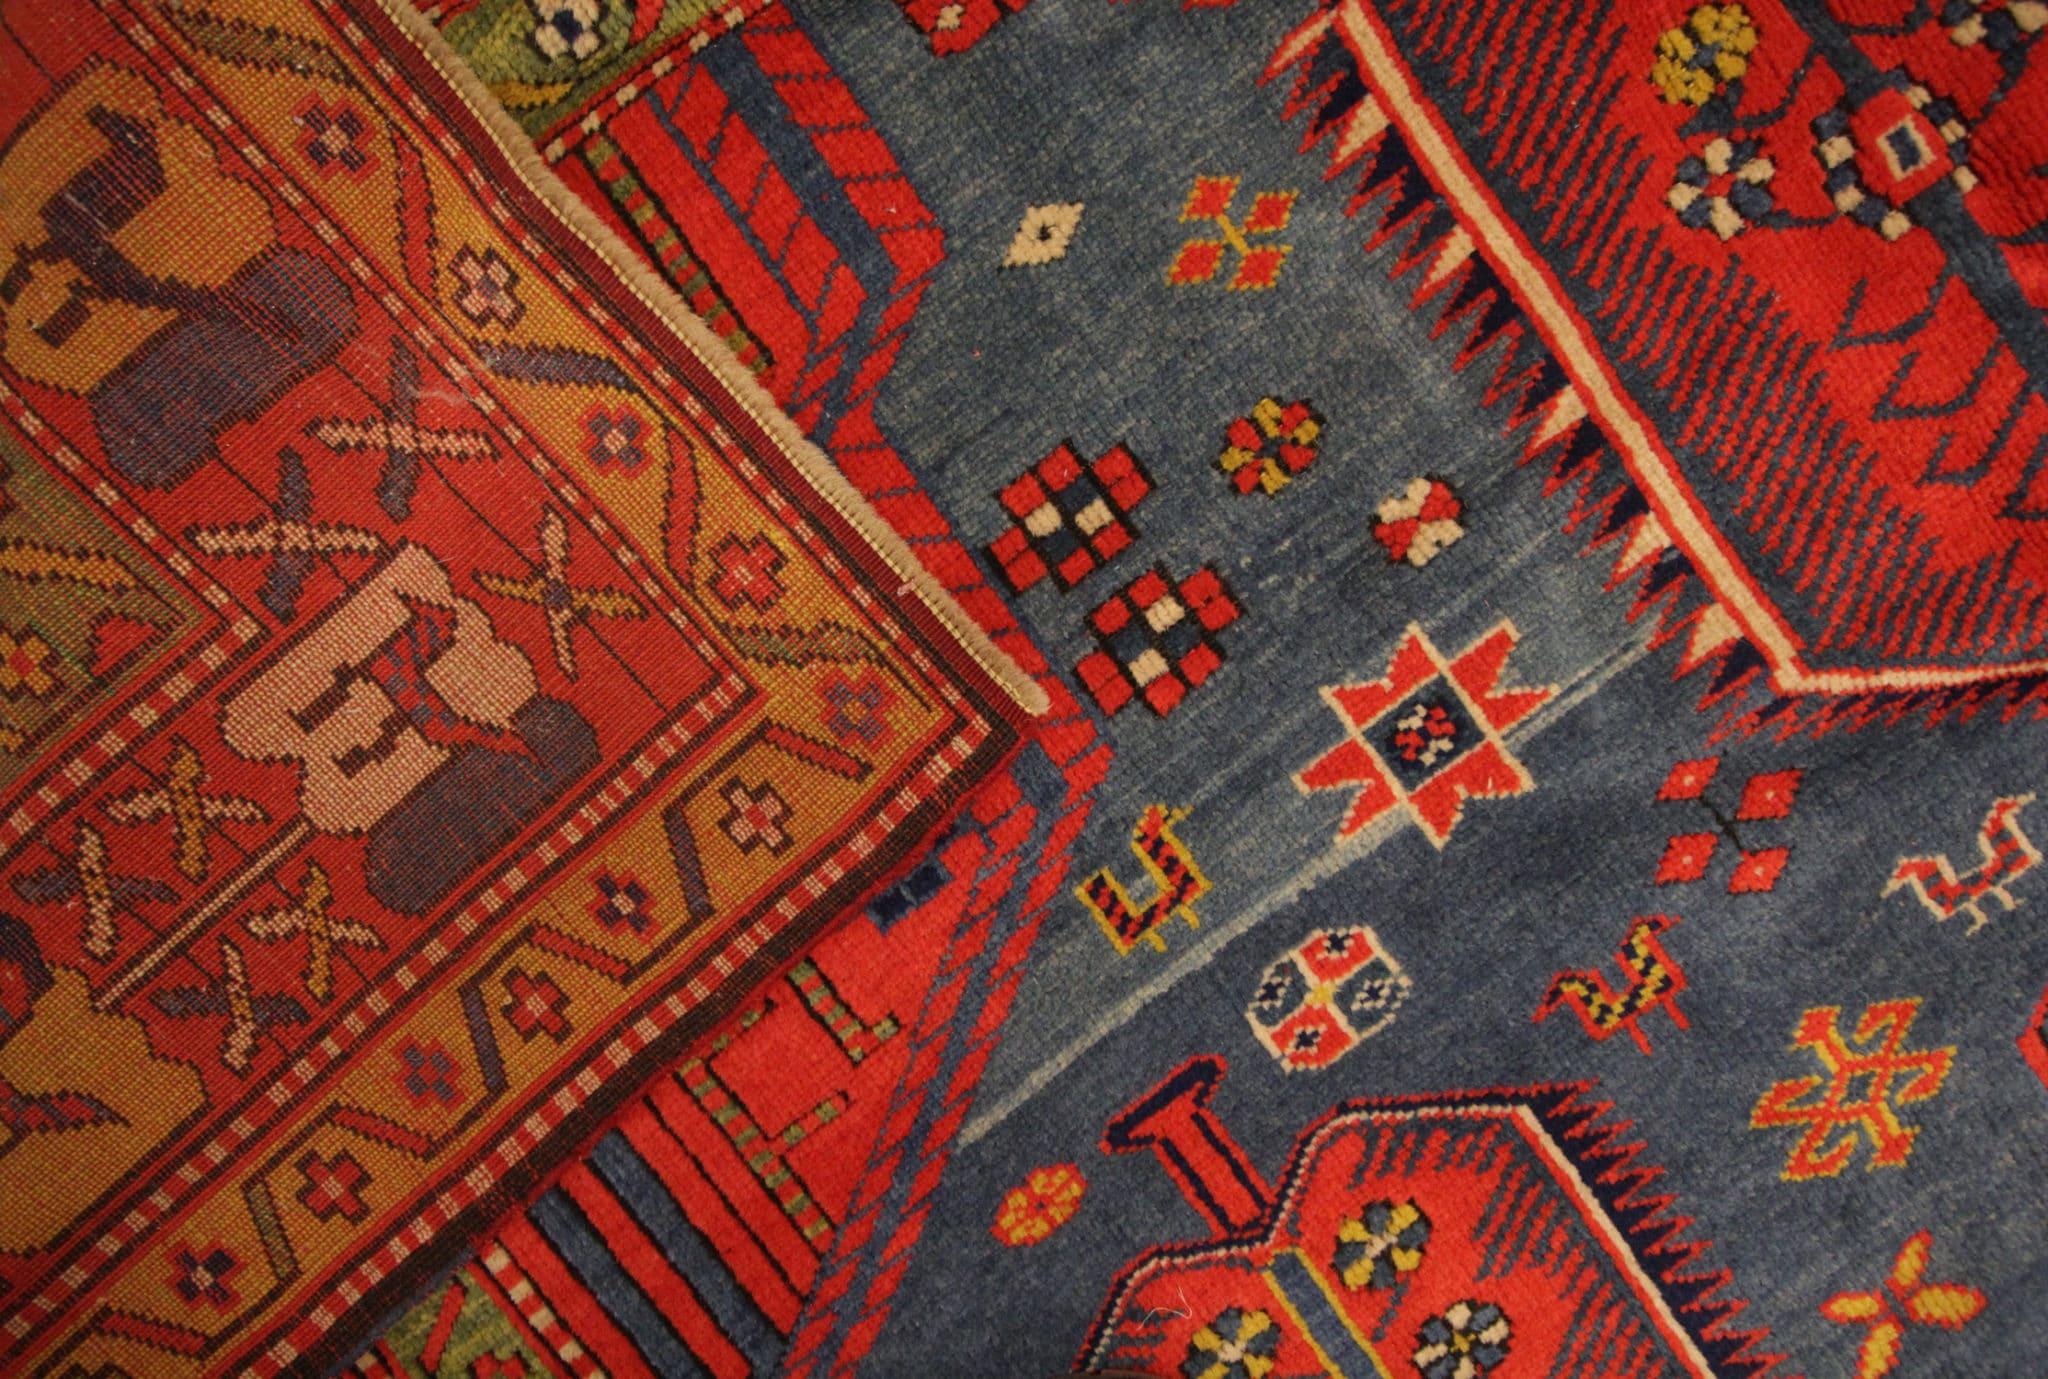 Bring home a piece of history with our antique Caucasian Karabagh carpet. Hand-knotted with exquisite craftsmanship, this rustic wool rug emanates the charm of tribal heritage. Originating from the Caucasus region in Azerbaijan, this rug boasts a